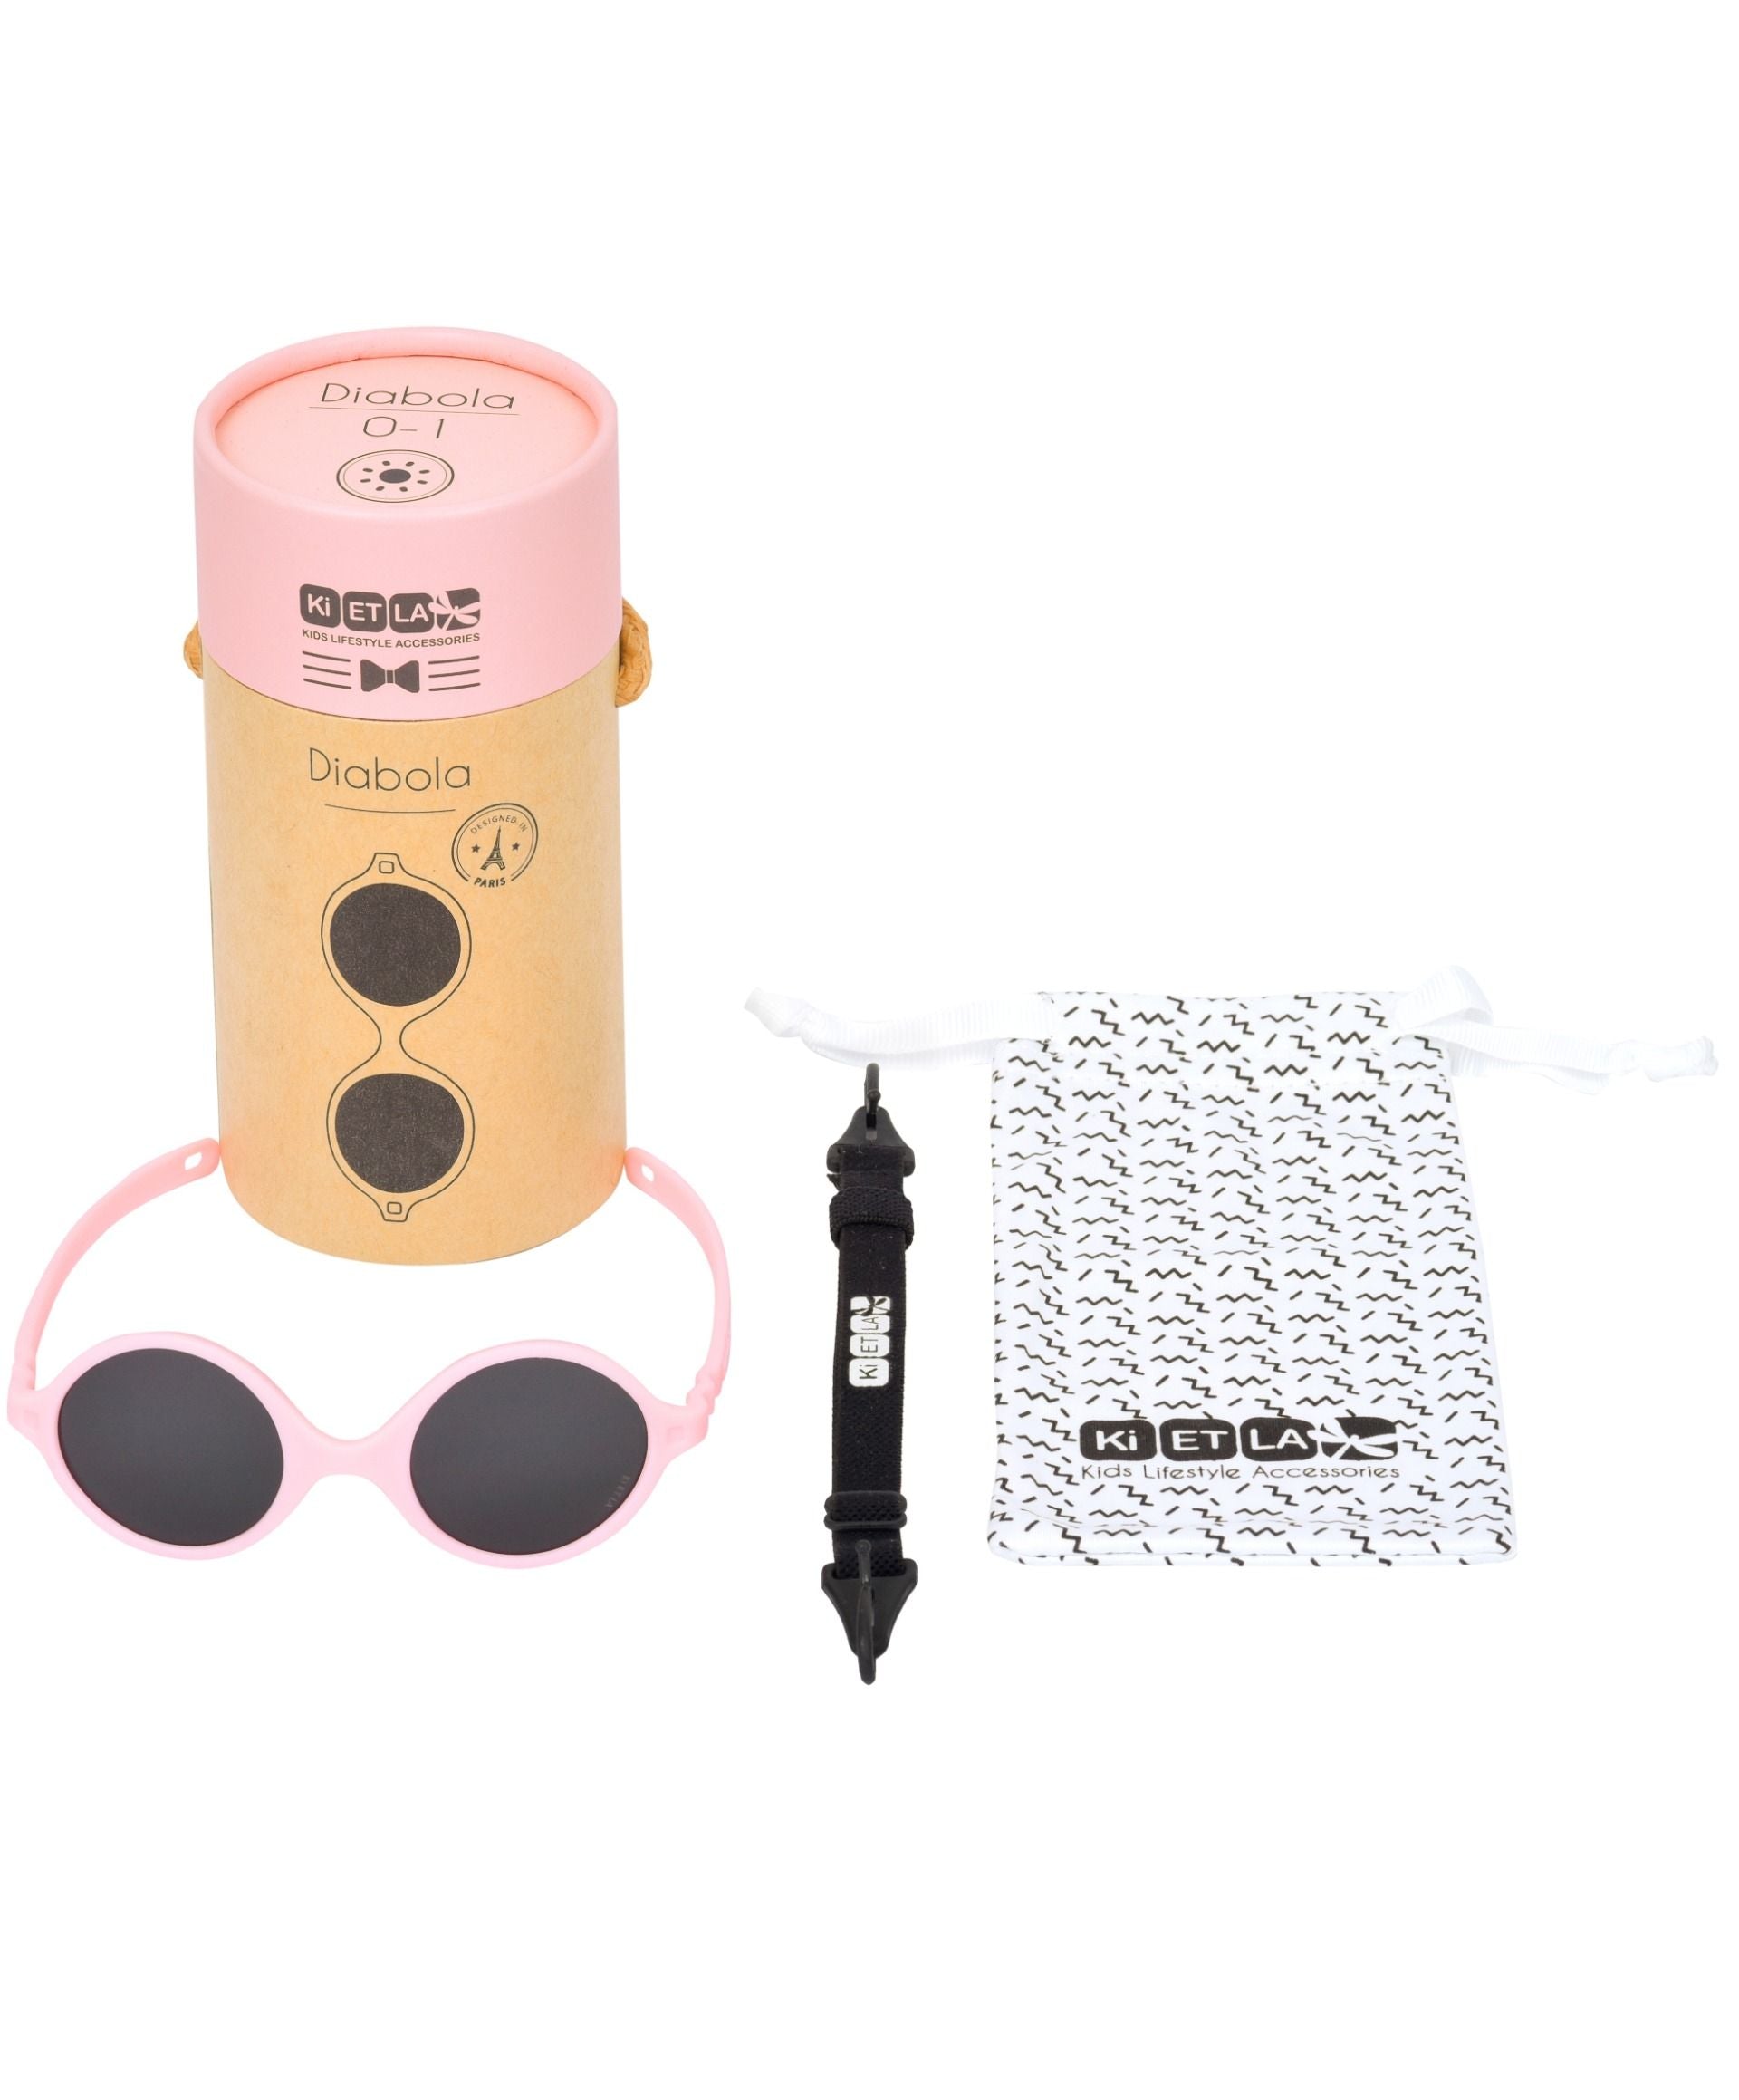 Sunglasses Diabola Blush Pink with UV Protection packaging